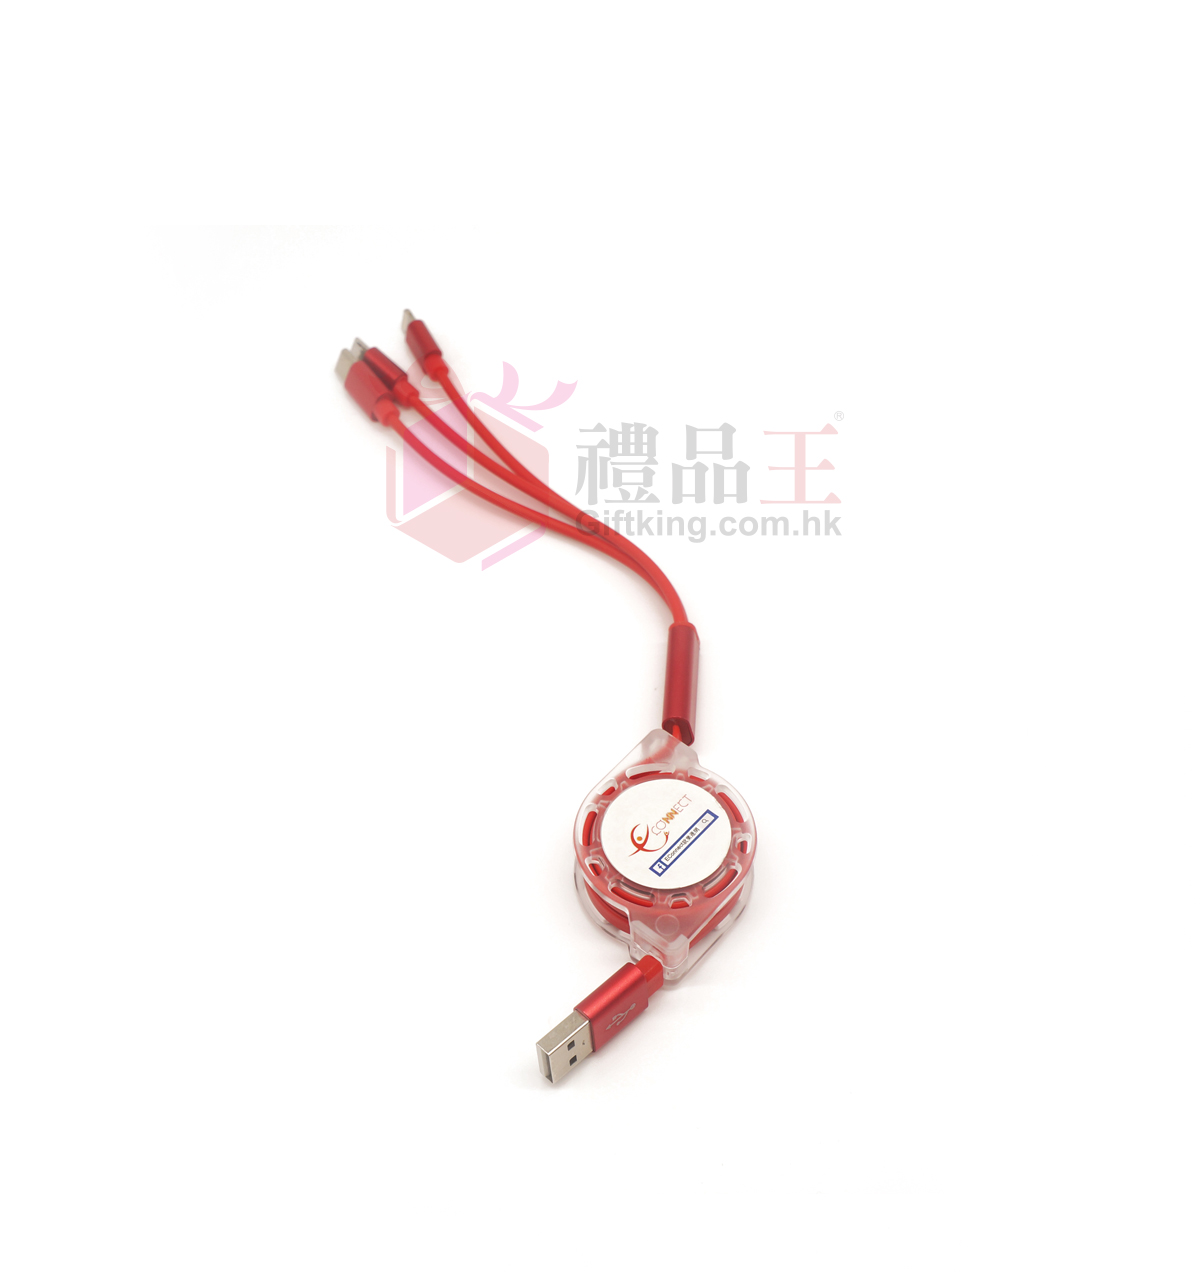 Econnect 3-in-1 charging cable ( Electronic gift)